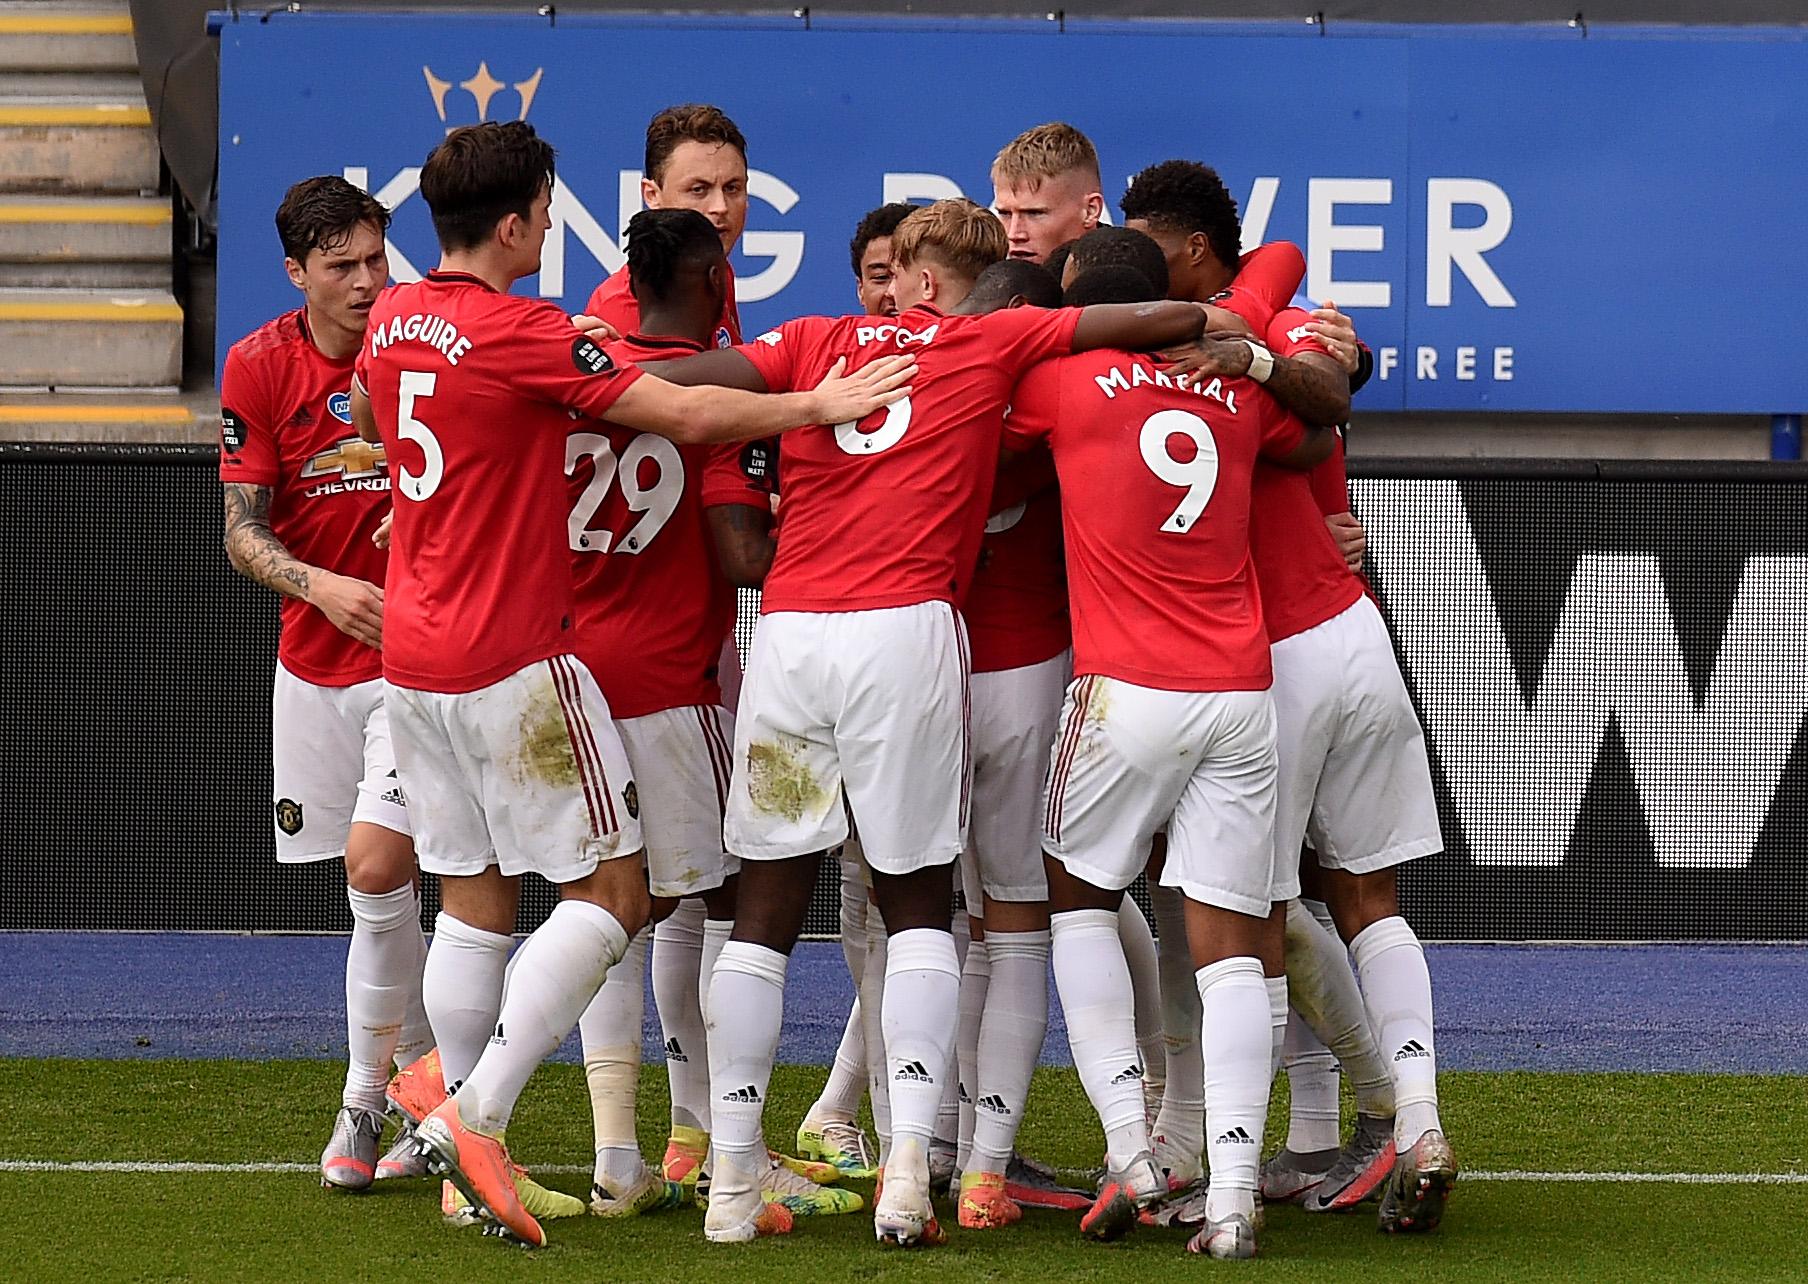 Leicester City 0 - 2 Manchester United